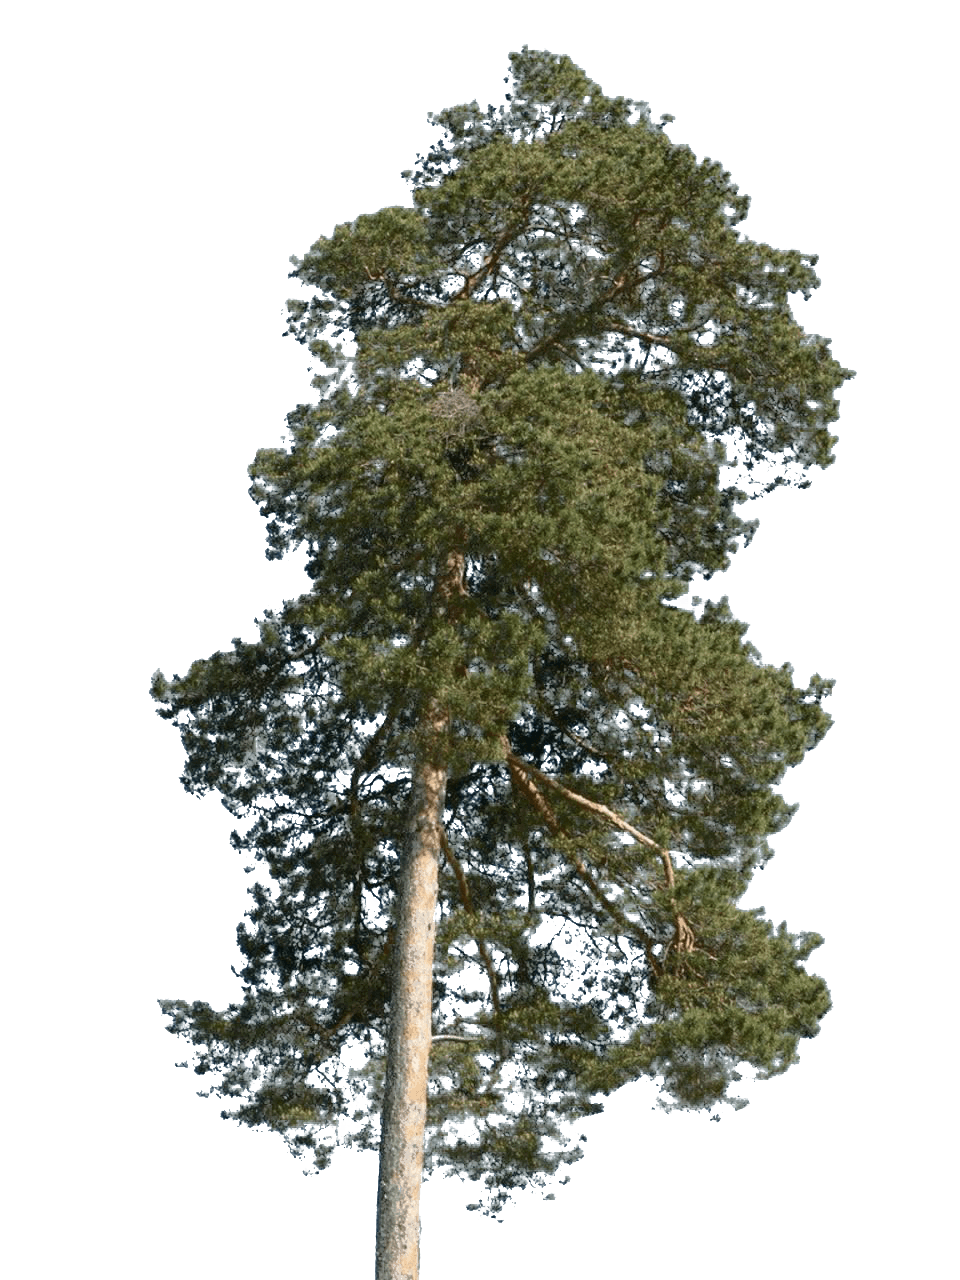 Scots pine, Pinus sylvestris, characterisitc tree of the courtyard